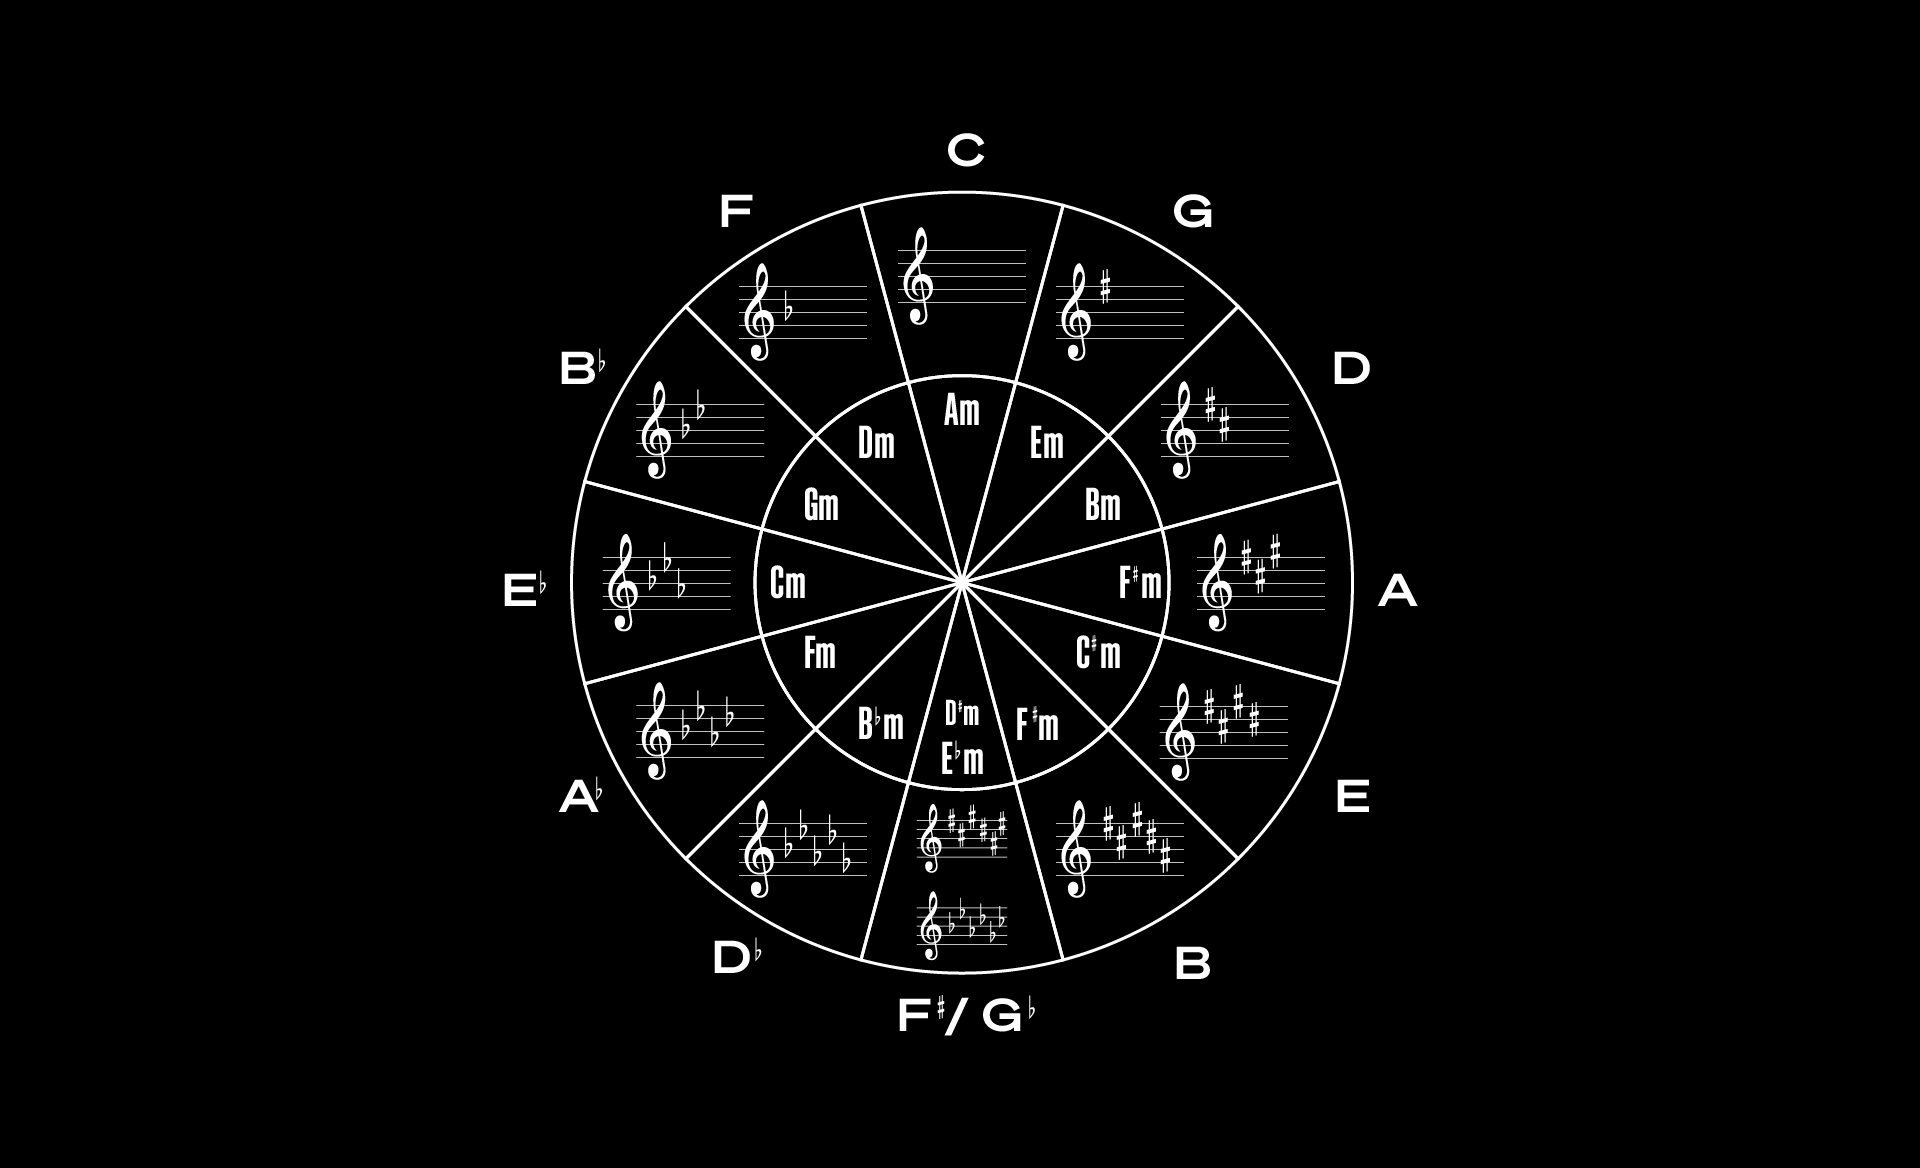 Circle of fifths explained: What it is and how to use it